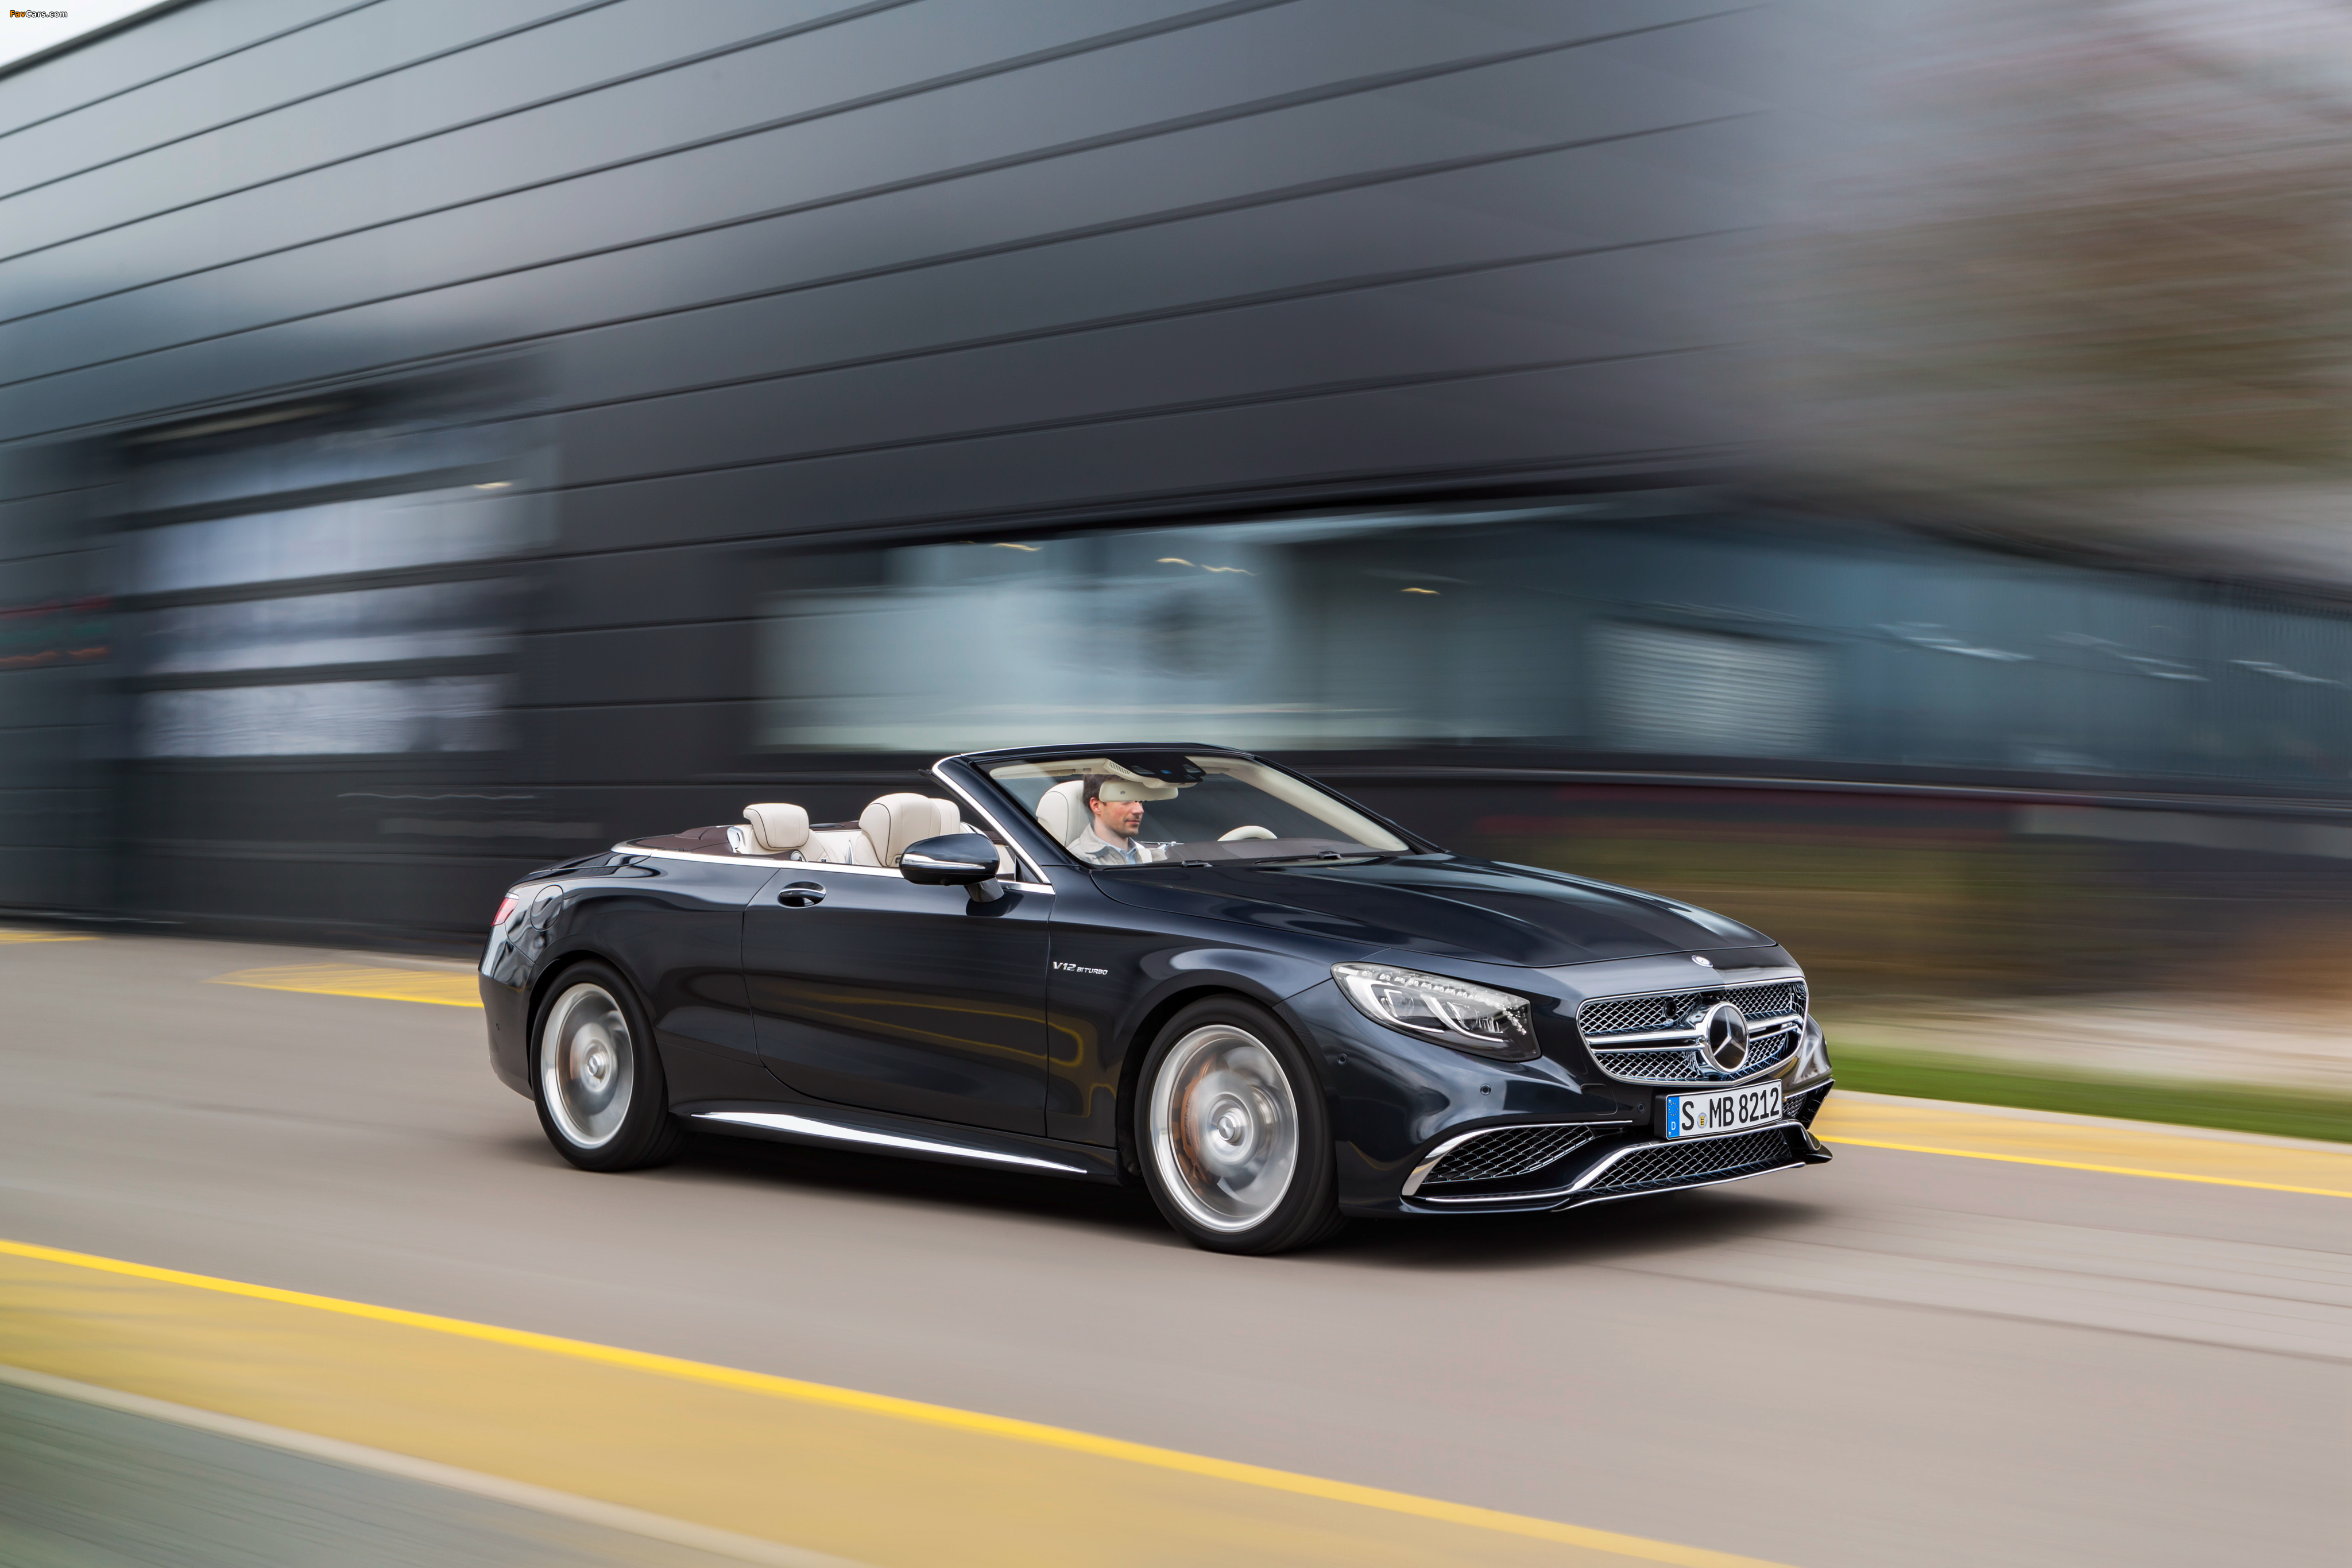 Mercedes-AMG S 65 Cabriolet (A217) 2016 wallpapers (4096 x 2731)